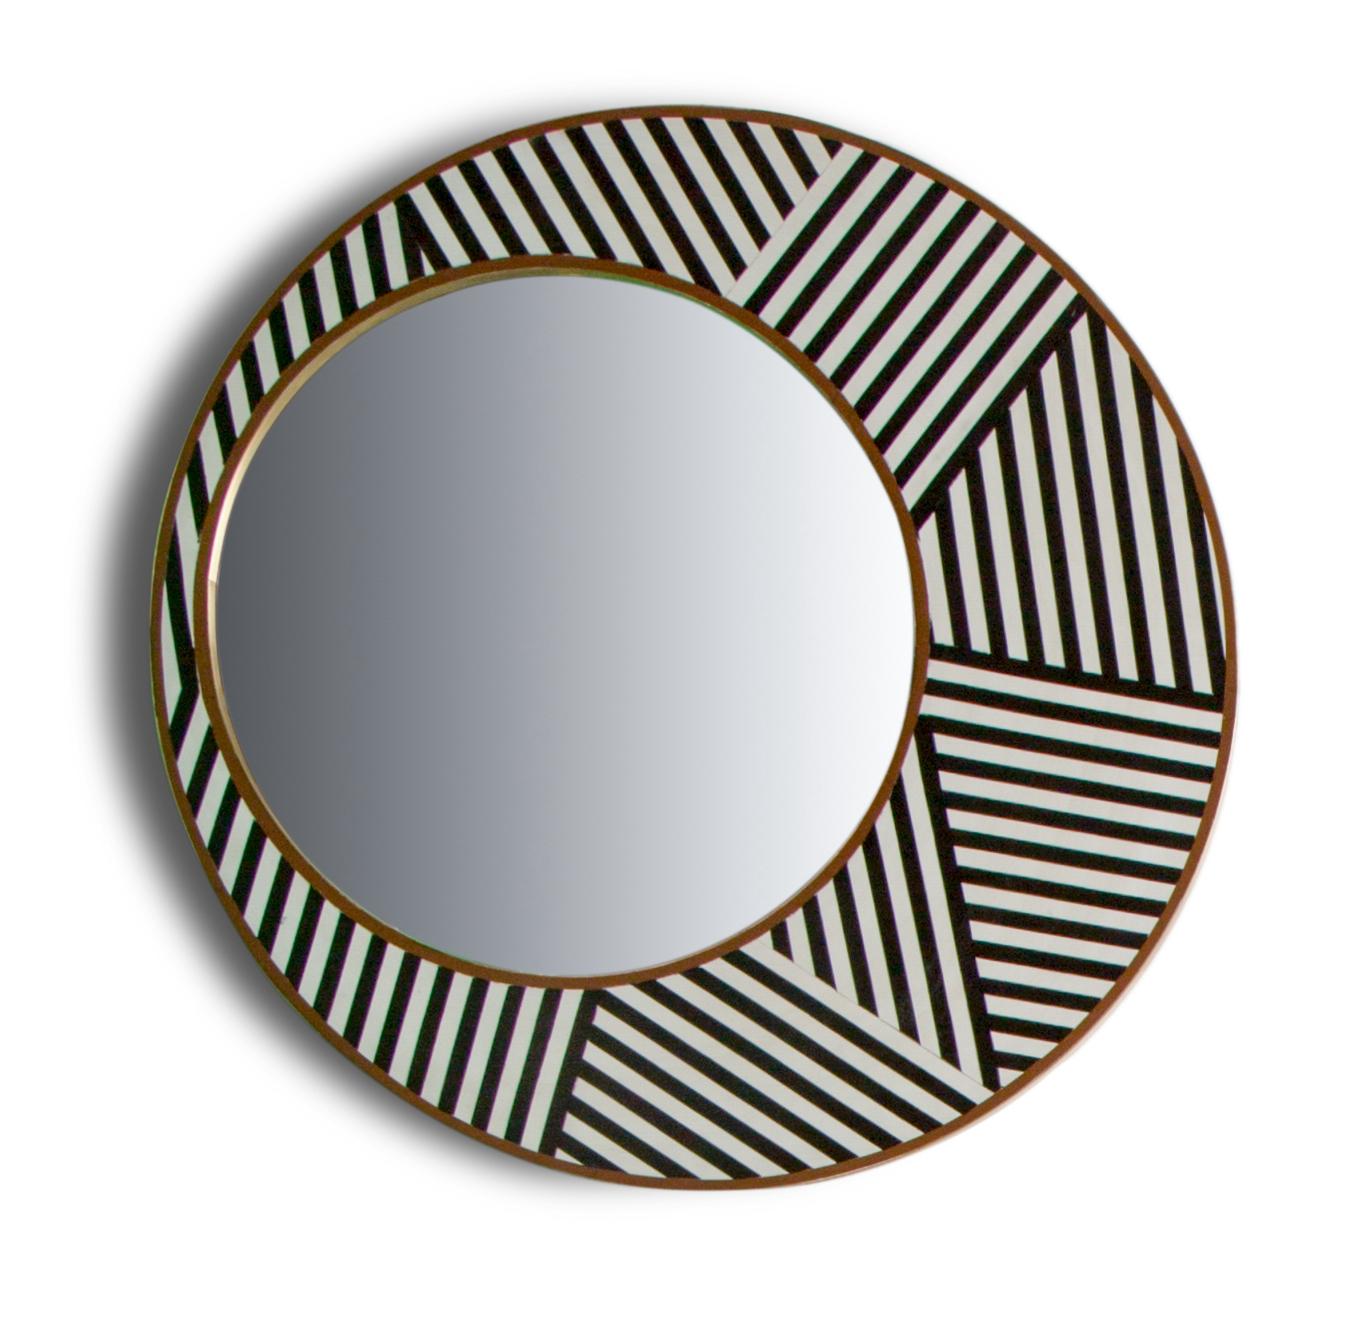 Hand Crafted Round Decorative Mirror with Black & White Design and Brass Borders. 
A voguish and contemporary selection of wall mirrors to lighten up any space in your home. Our ADOM mirrors have a bold rhythmic linear pattern that radiate an objet